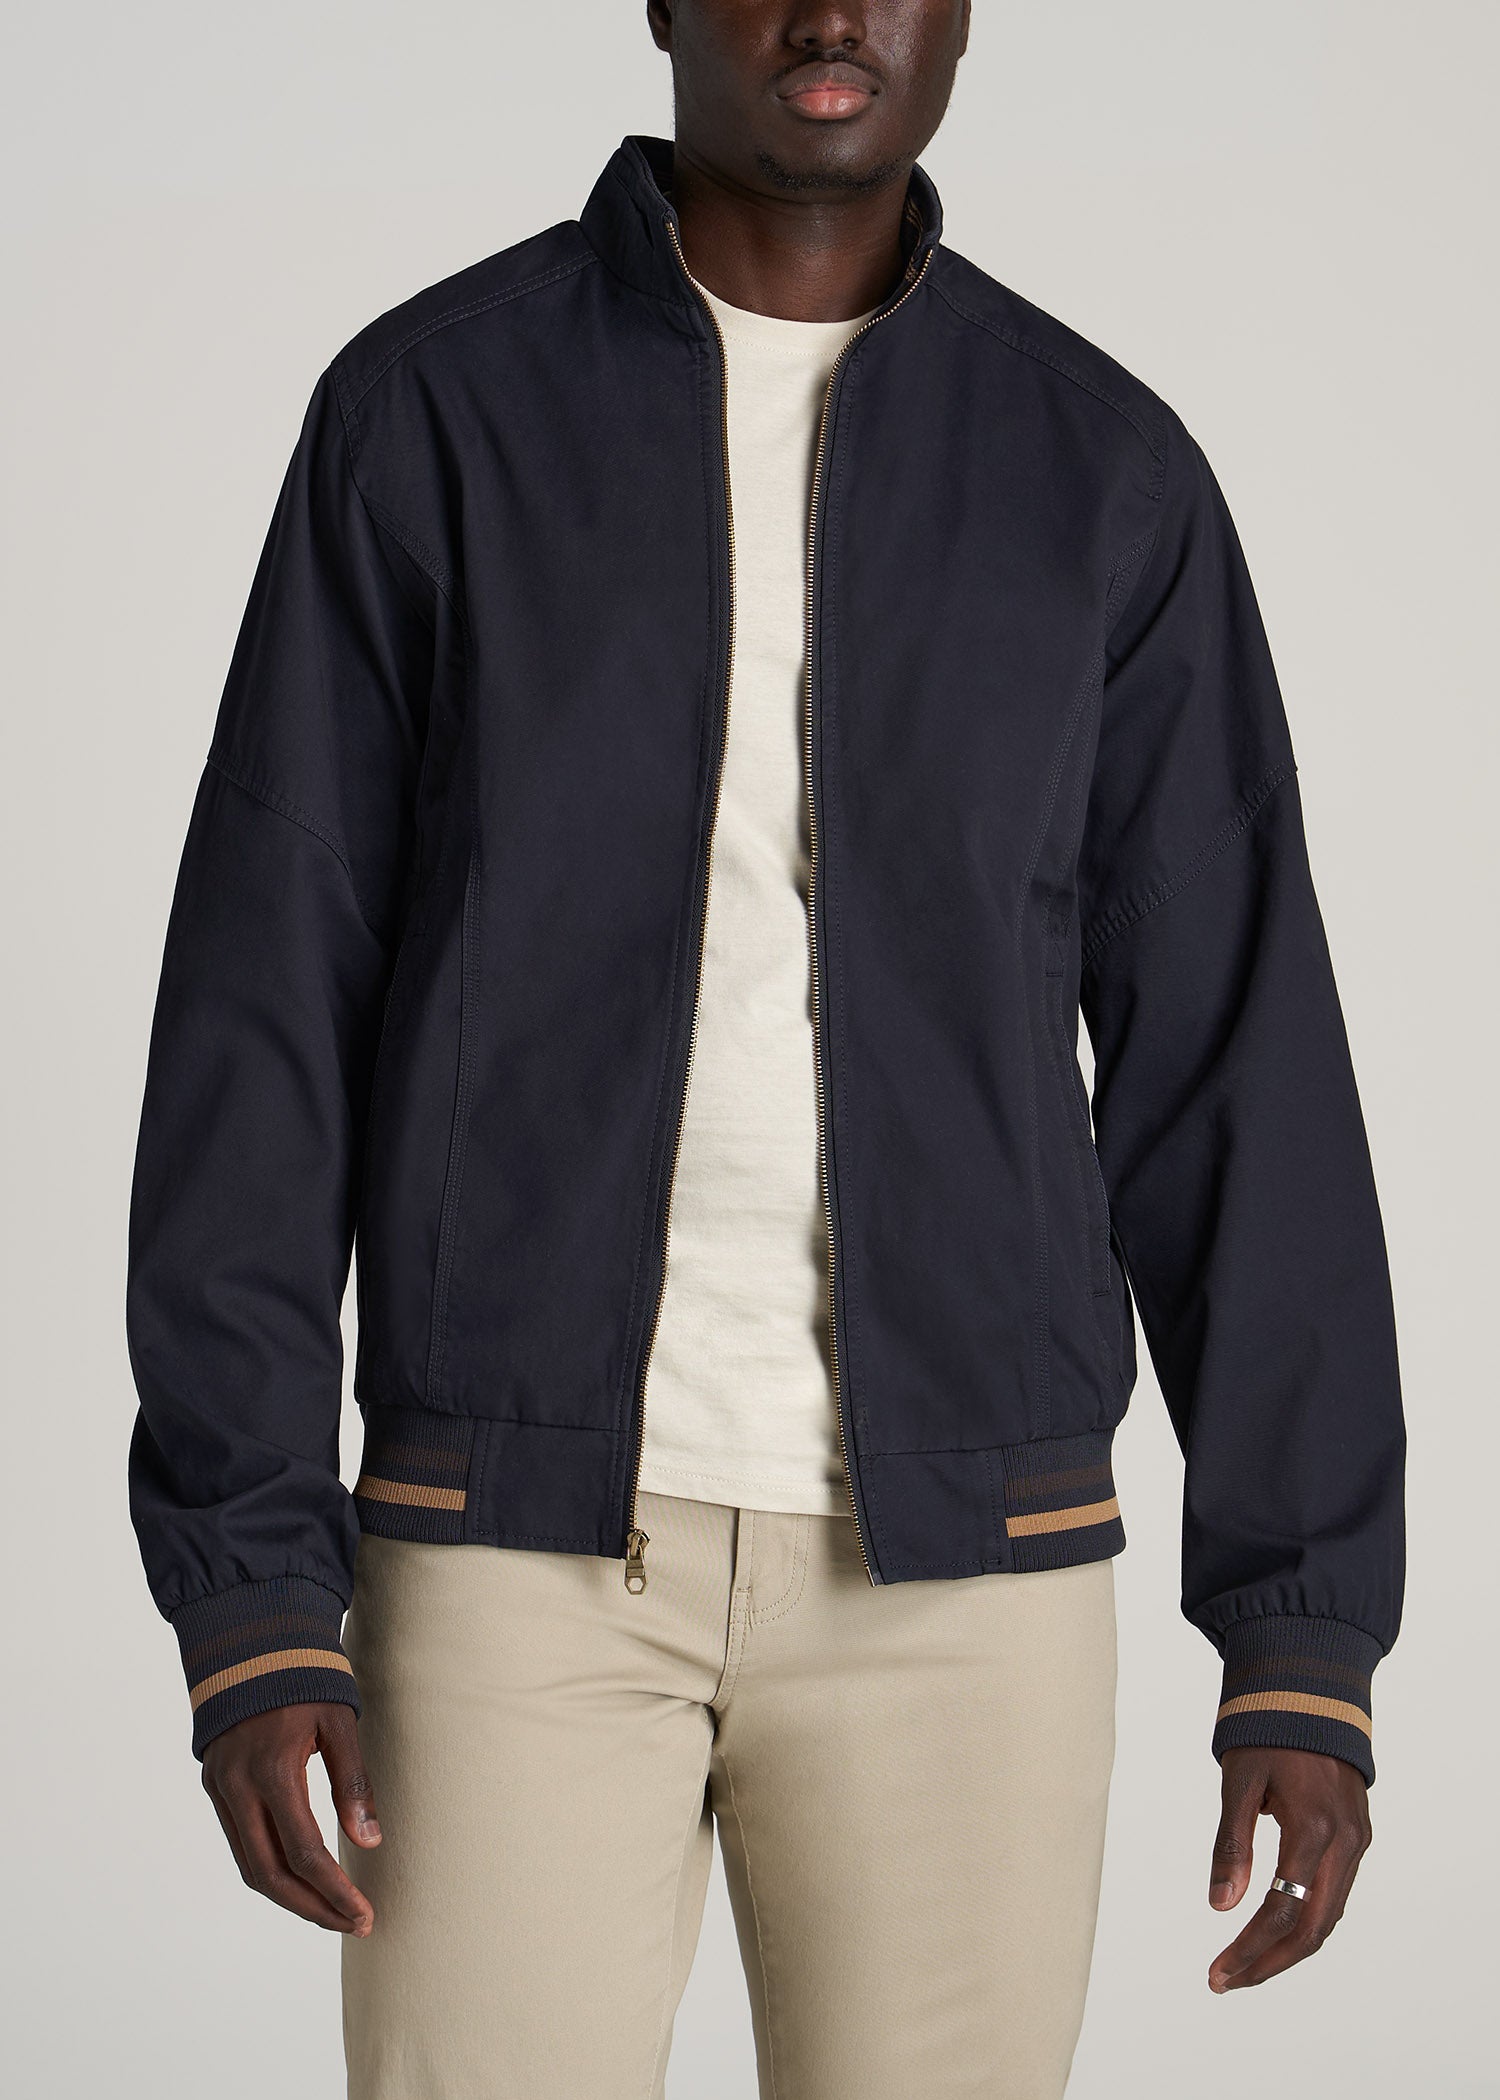       American-Tall-Men-Cotton-Bomber-Jacket-Salute-Navy-front